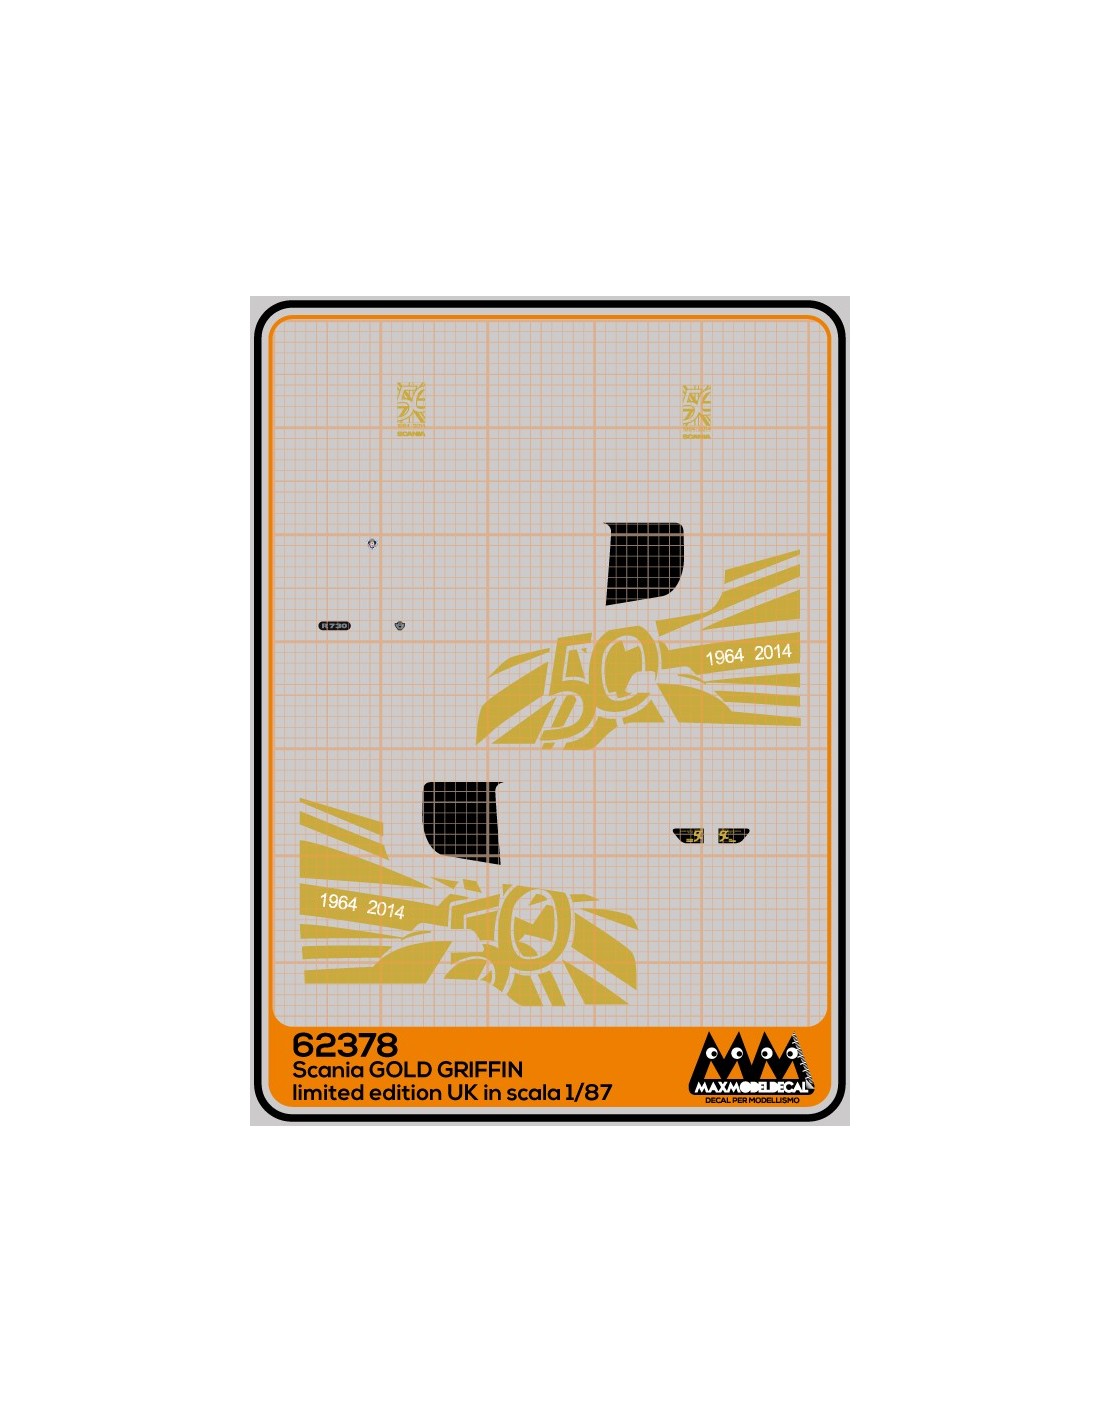 Scania R Gold Griffin 50th - Model Truck Decals 1/87 – Max Model